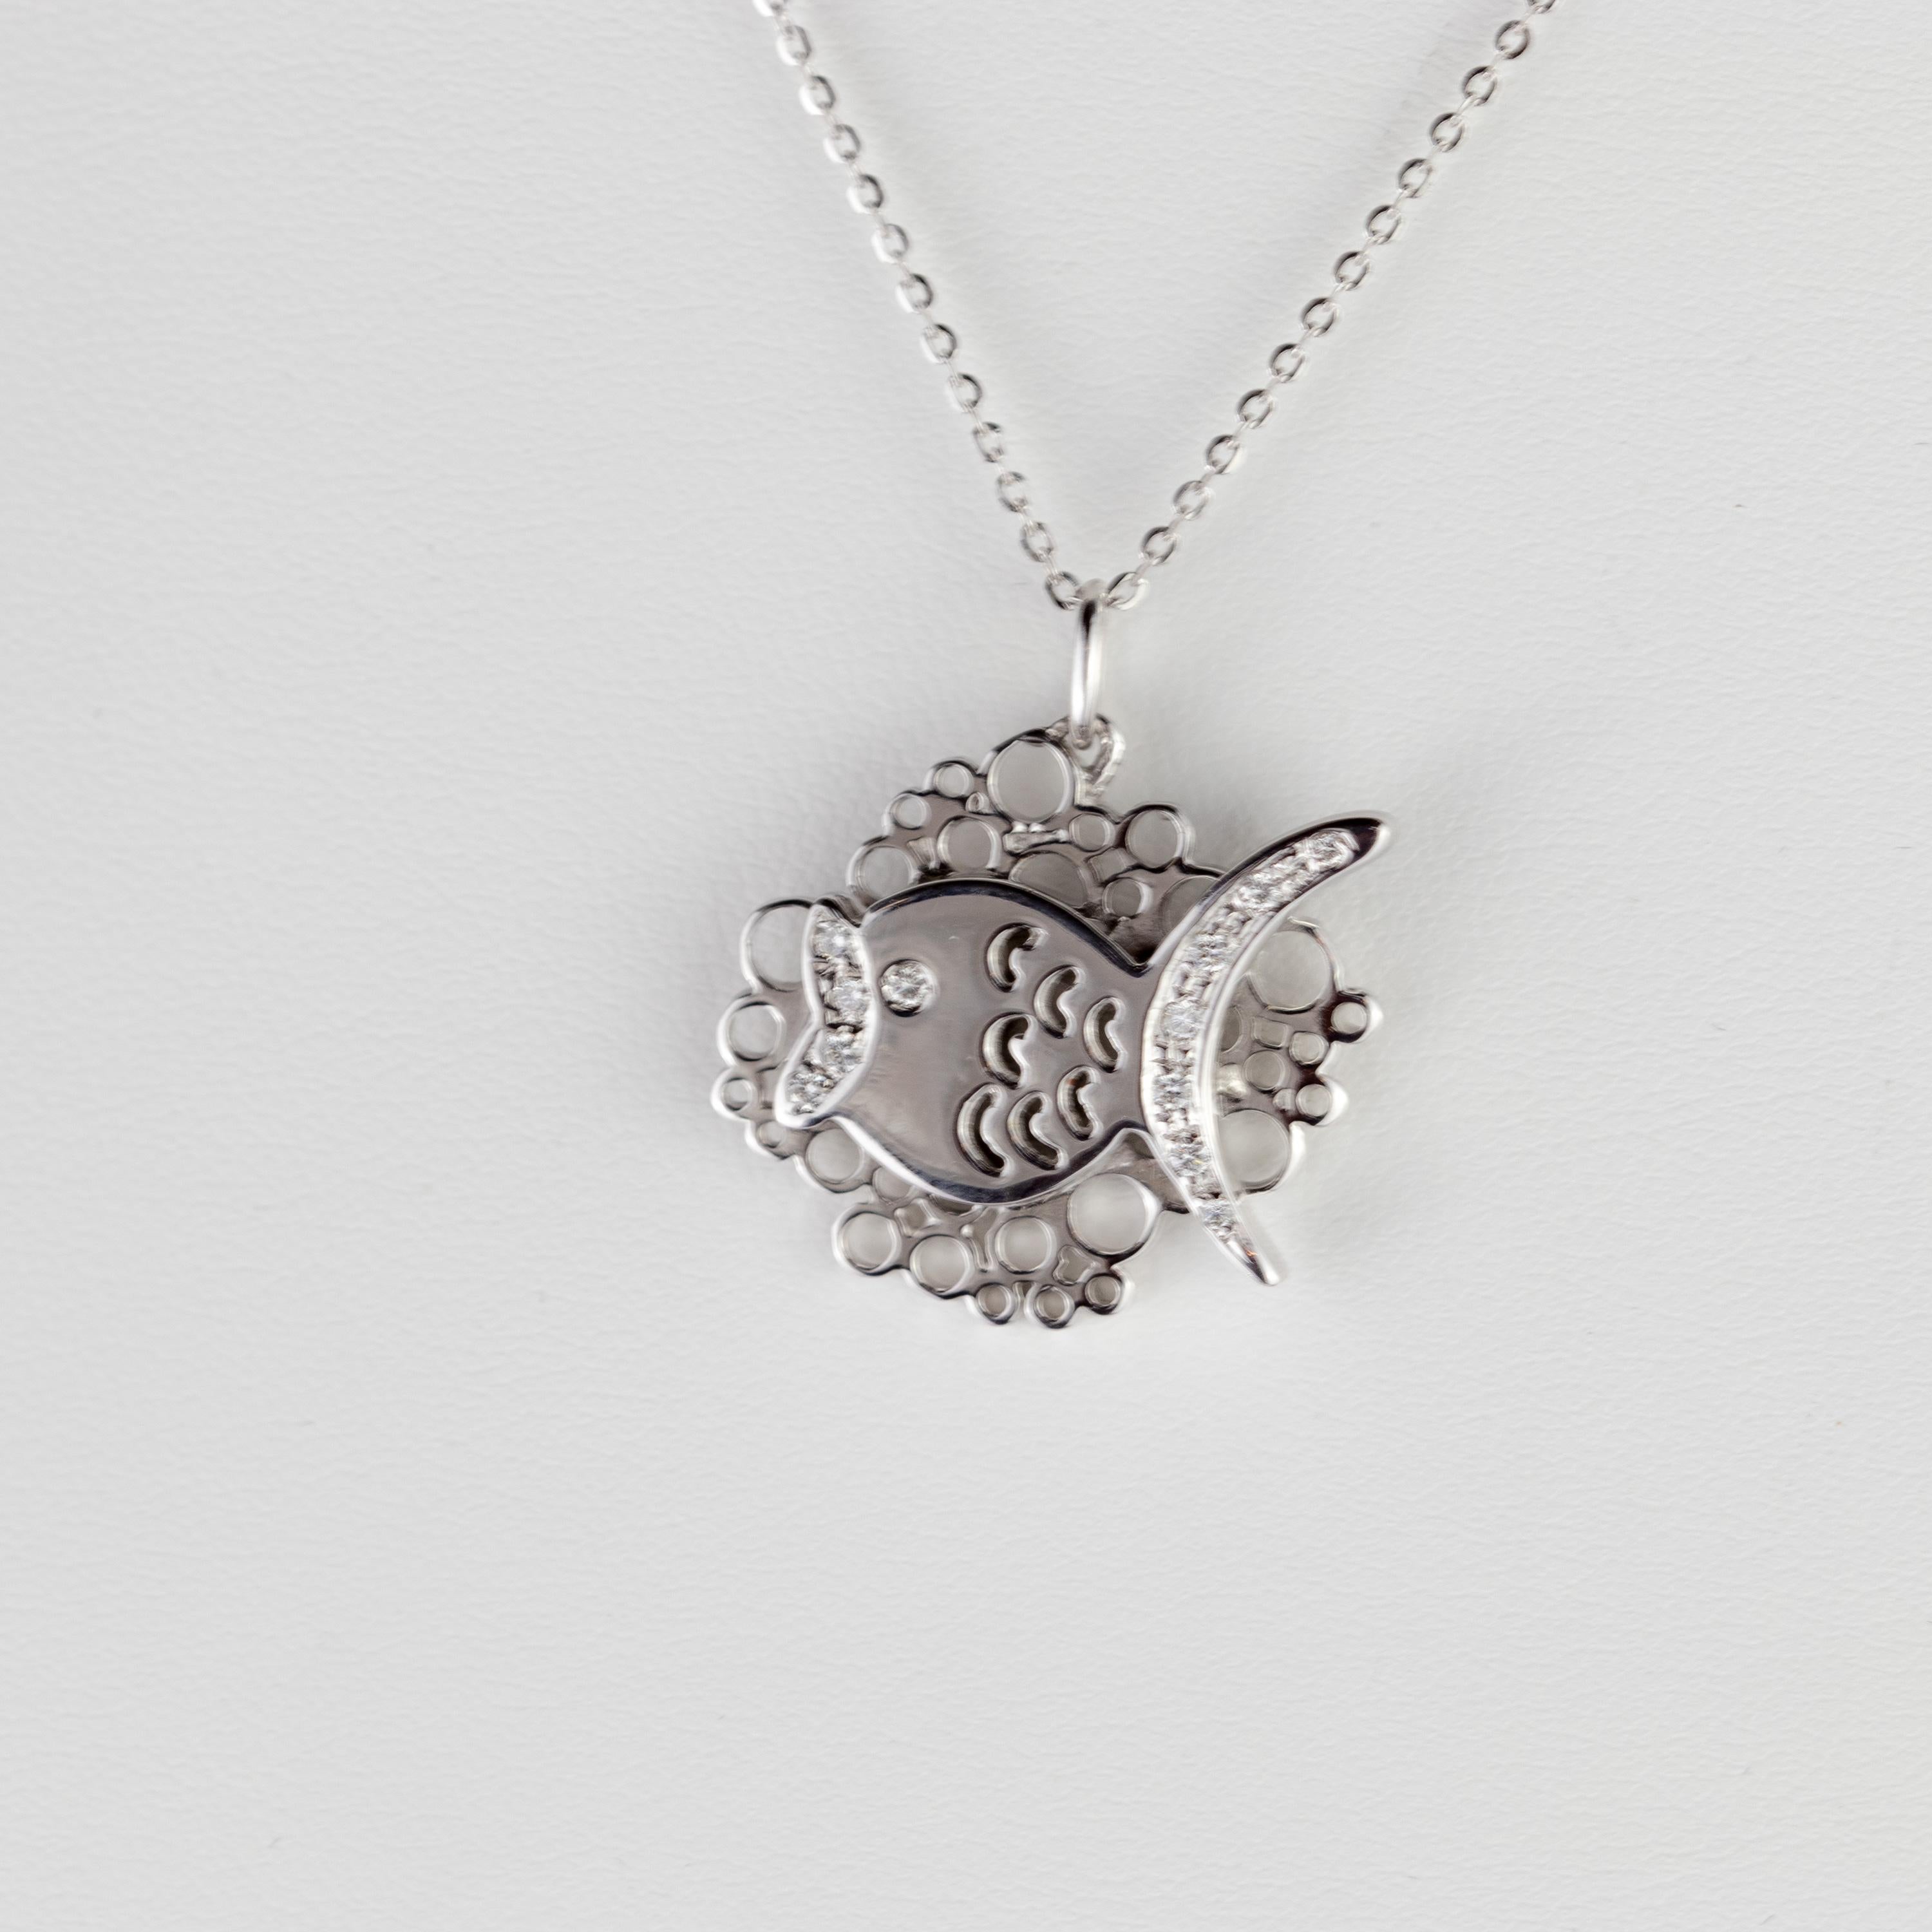 Elegant, modern and minimalistic one-of-a-kind necklace with a white gold carved fish pendant. Handmade jewels that highlight a magnificent creature with diamonds decorating its eye, mouth and fins with a total of 0.18 carat diamonds. Setted in a